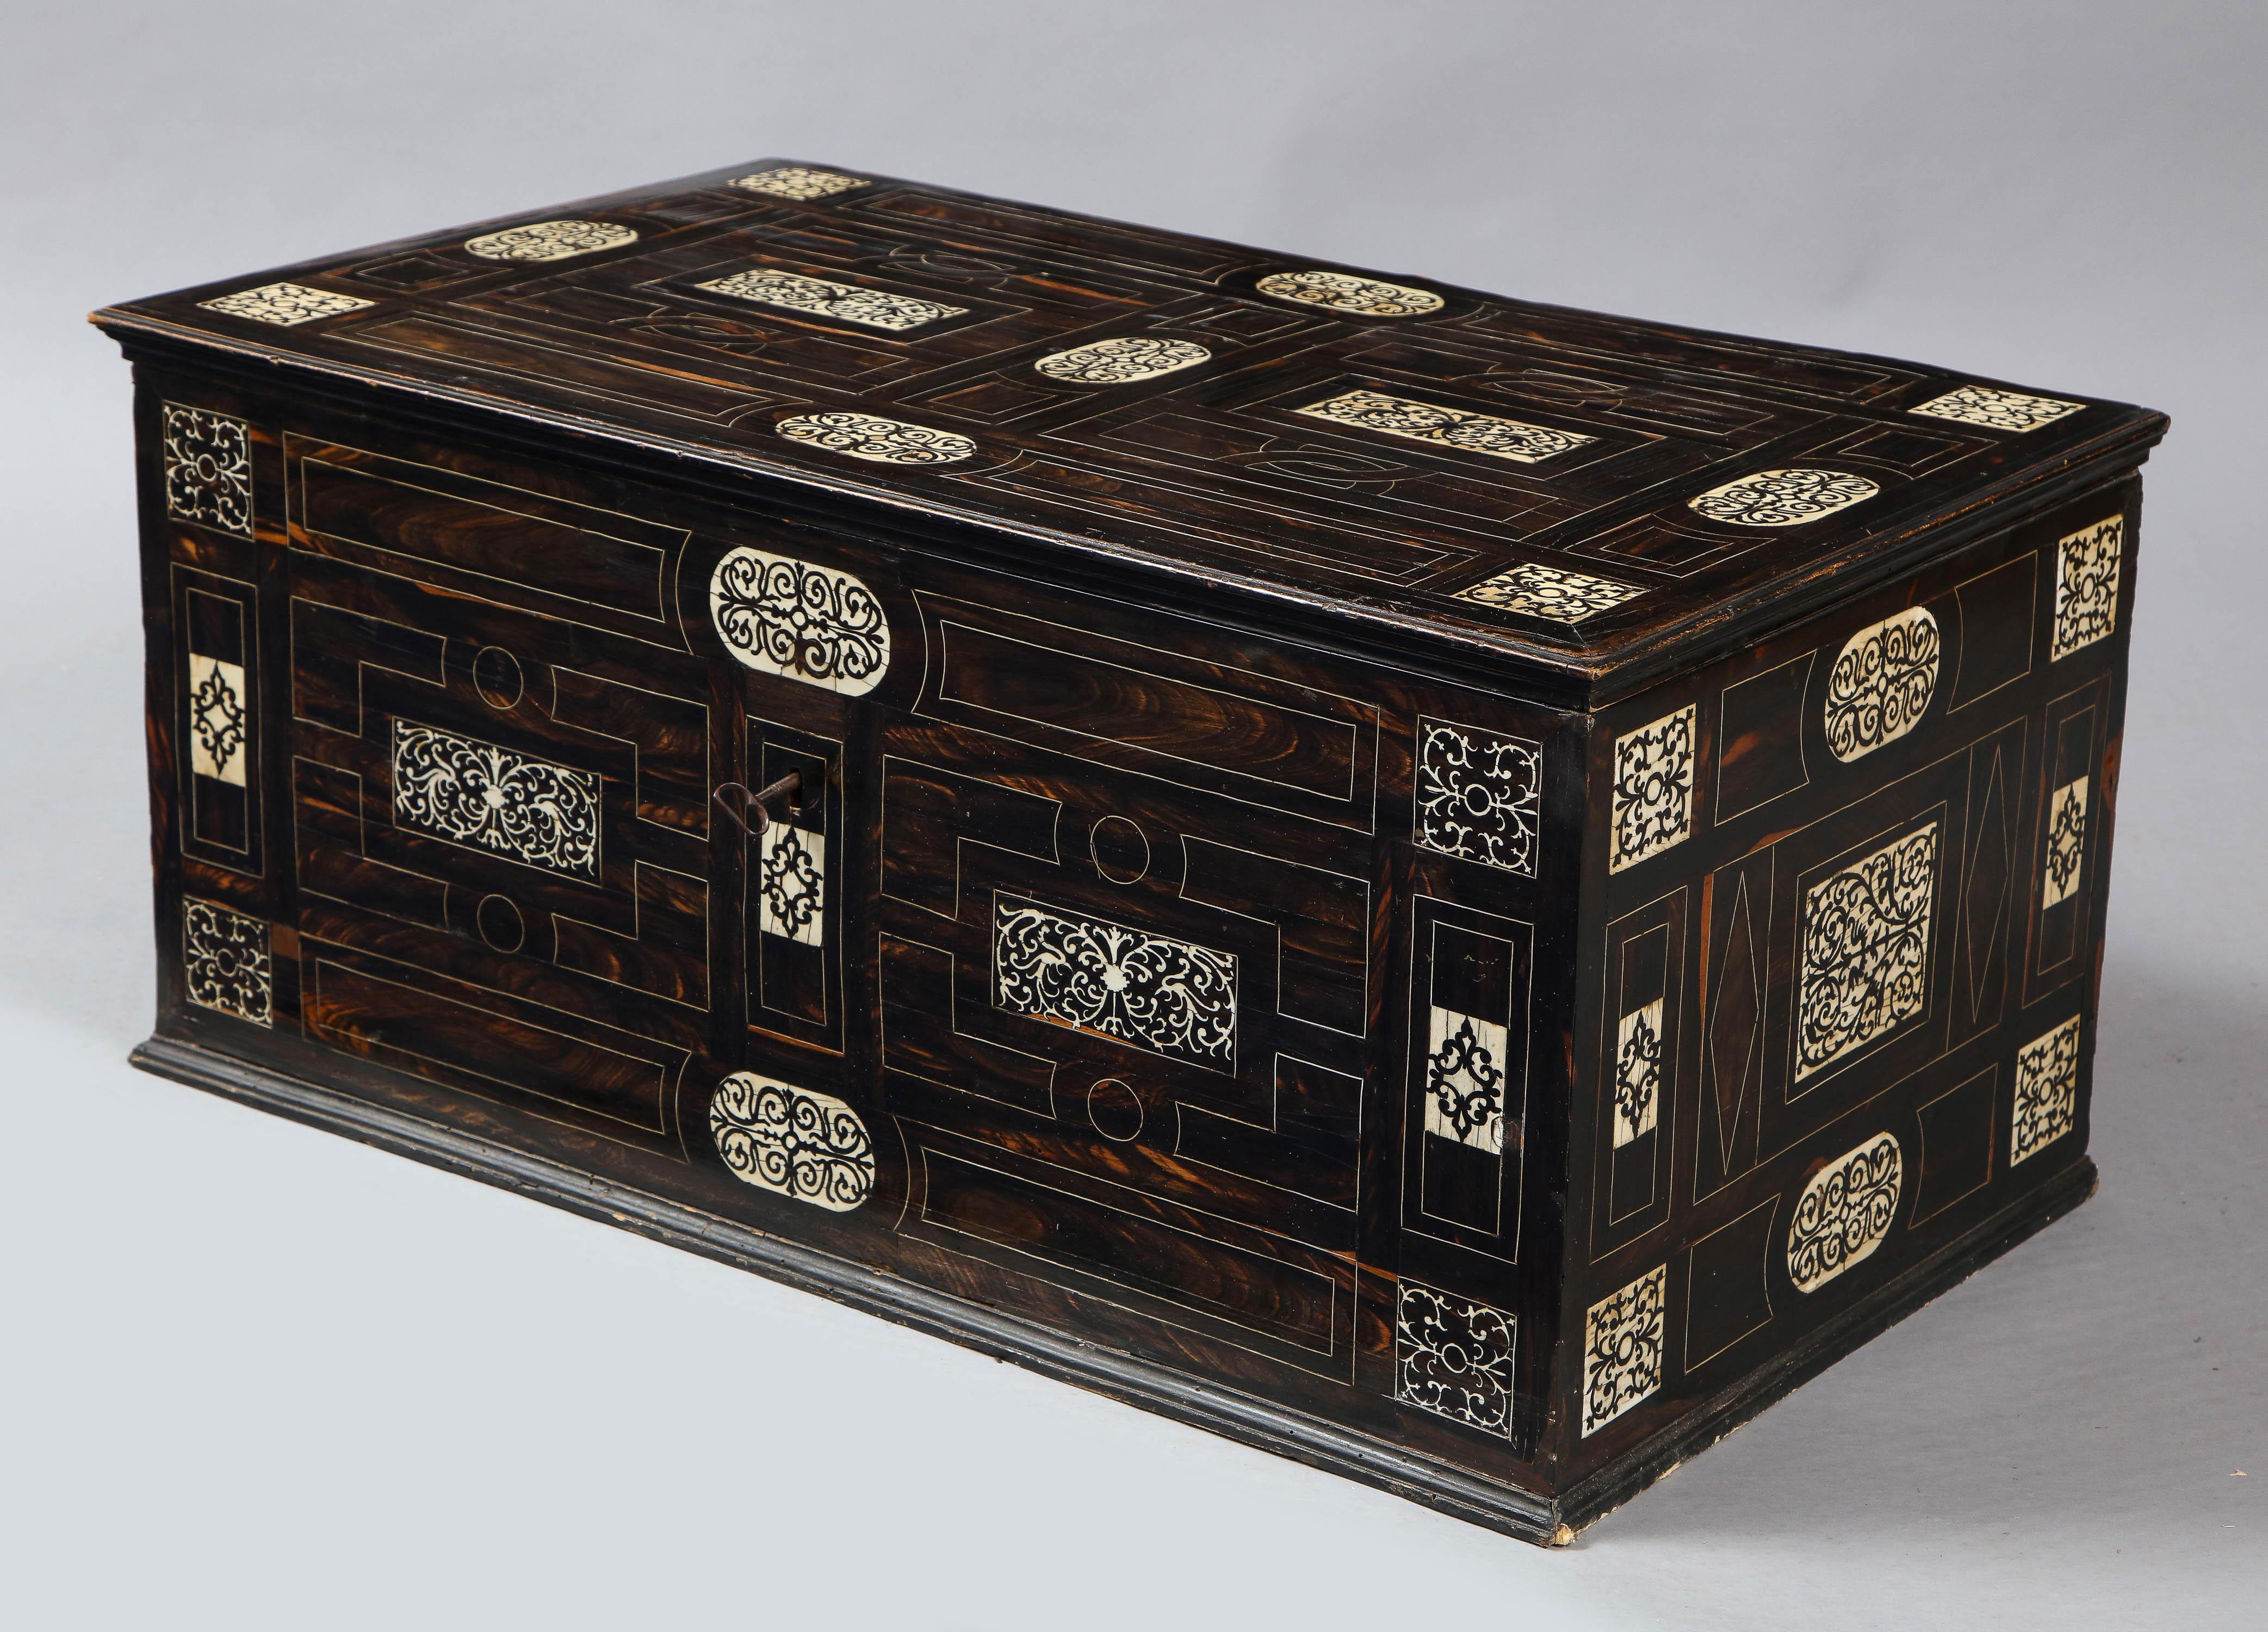 Fine 19th century Italian geometrically inlaid ebony chest with bone string inlay and arabesque inlaid panels, ideal coffee table size, the whole with pleasing surface and patina.